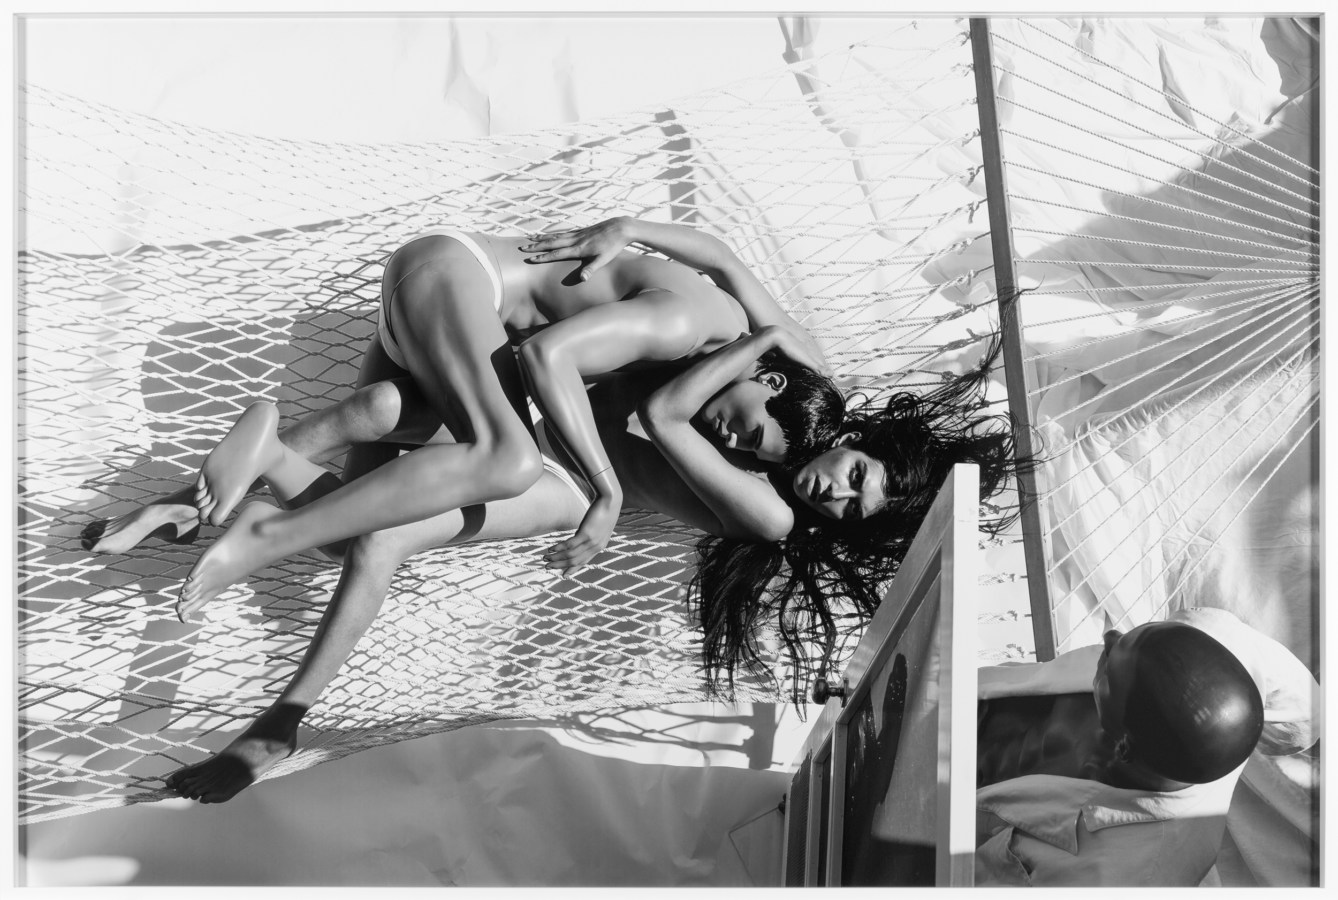 Black and white photograph of two people embracing on a hammock while another enters the space framed in white